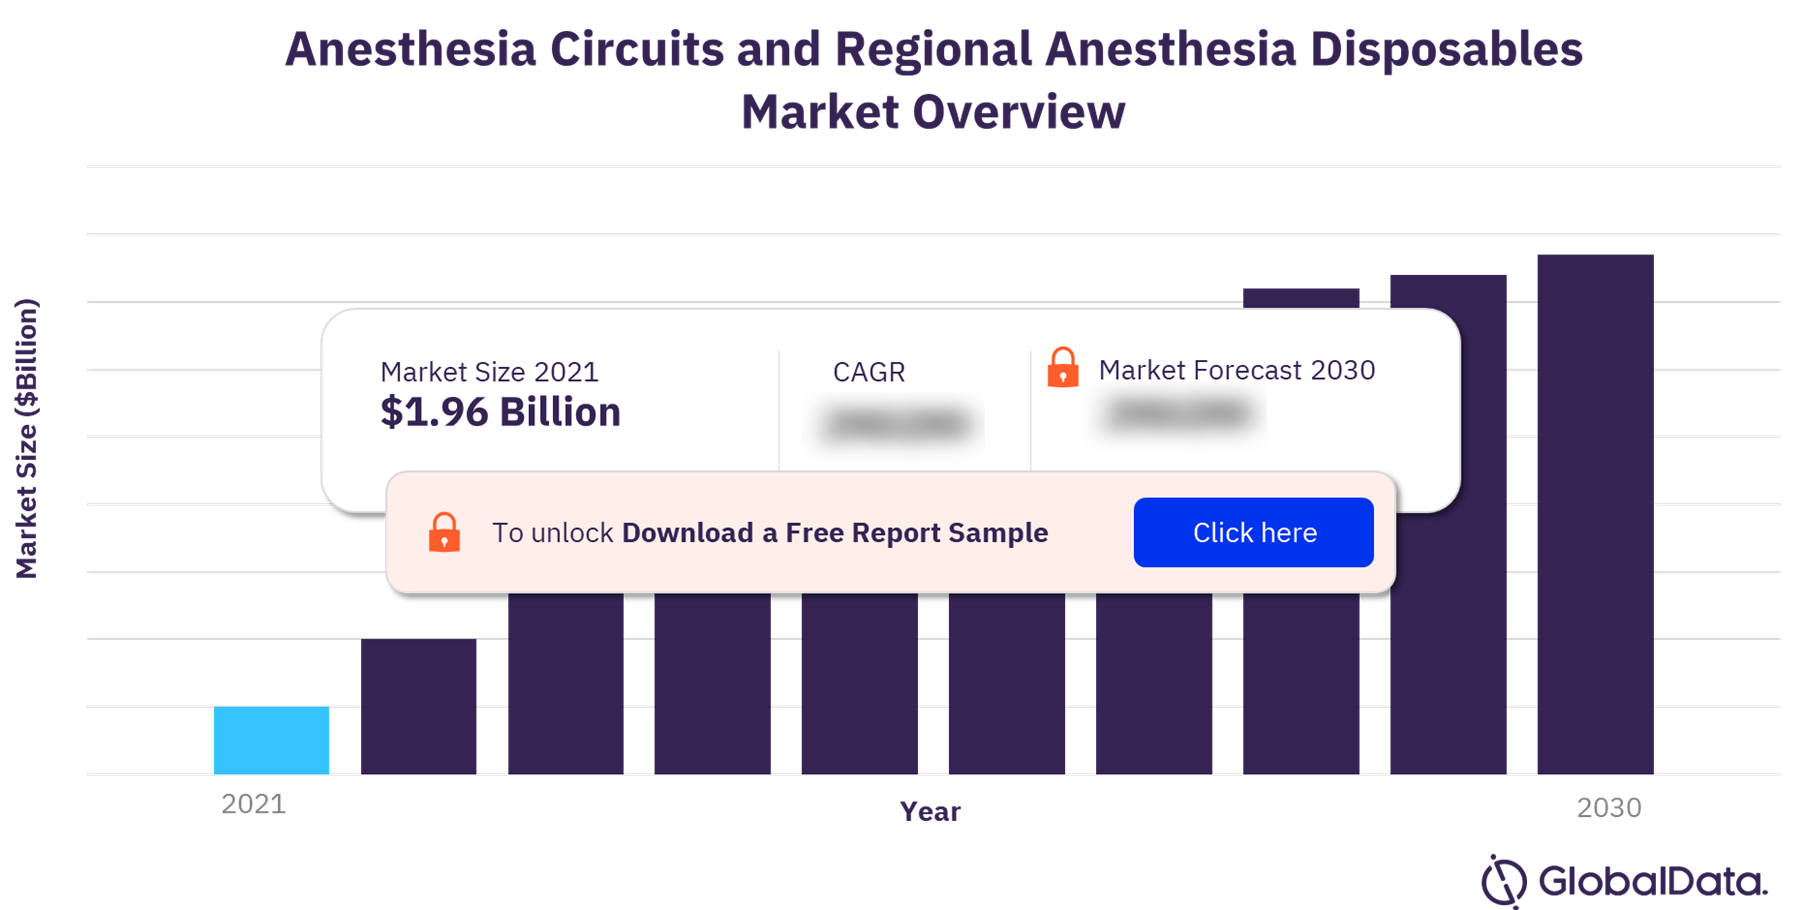 Anesthesia circuits and regional anesthesia disposables market outlook